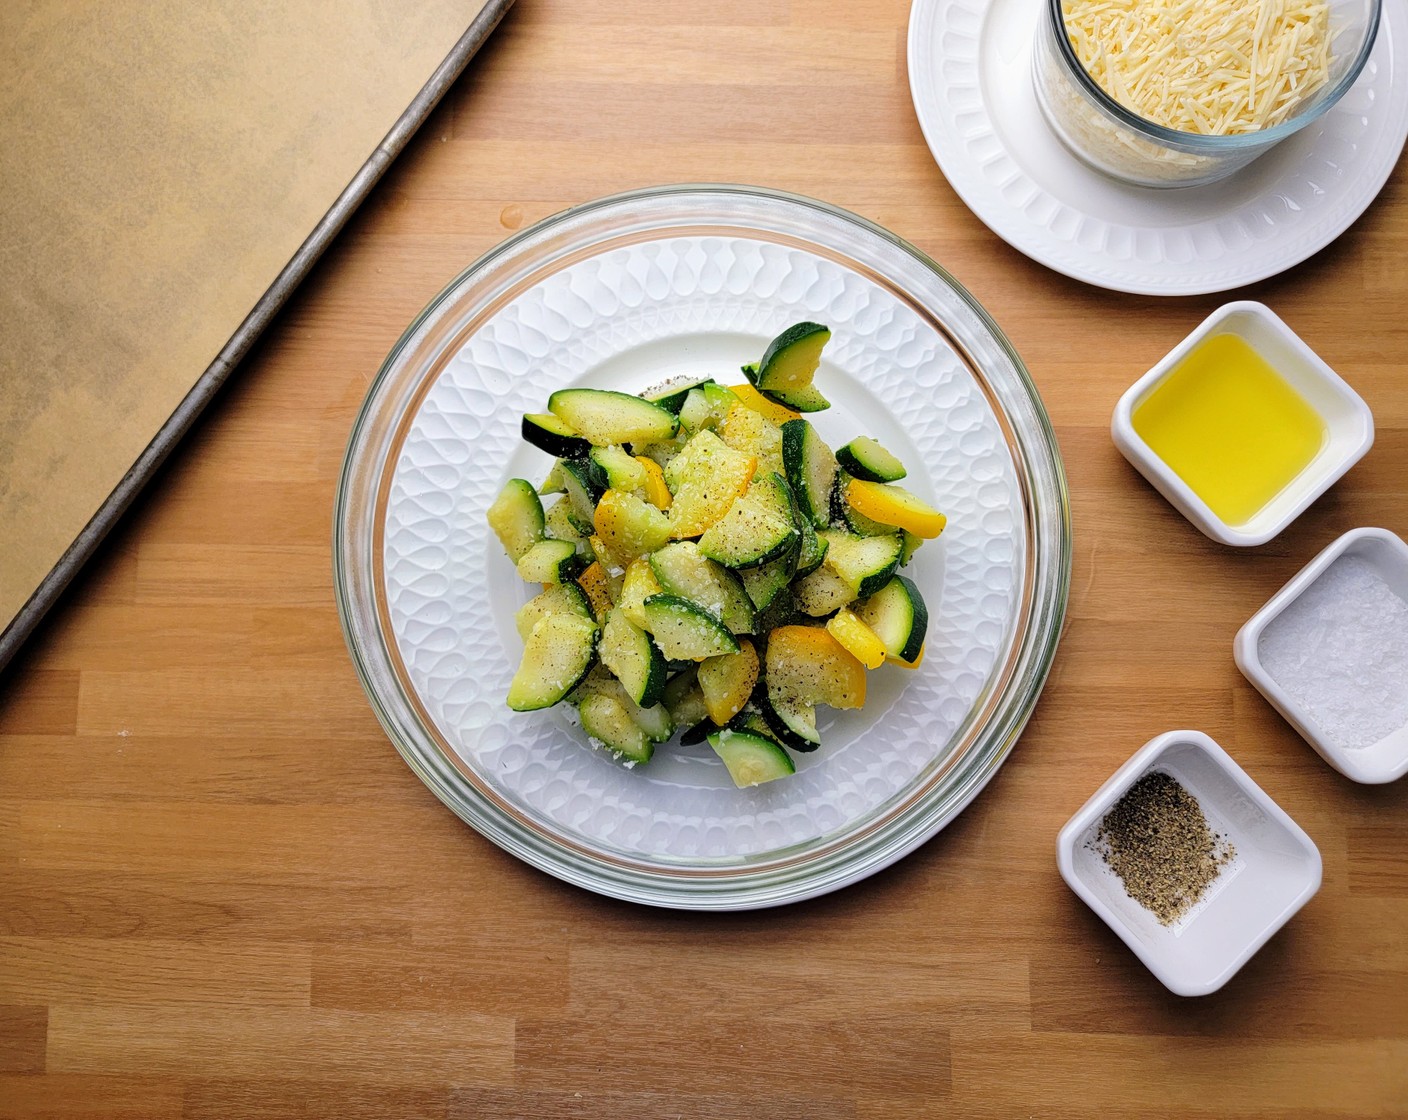 step 2 Place the Frozen Zucchini Blend (2 cups) in a bowl and toss with Olive Oil (1 Tbsp), Kosher Salt (1 tsp), and Ground Black Pepper (1 tsp).